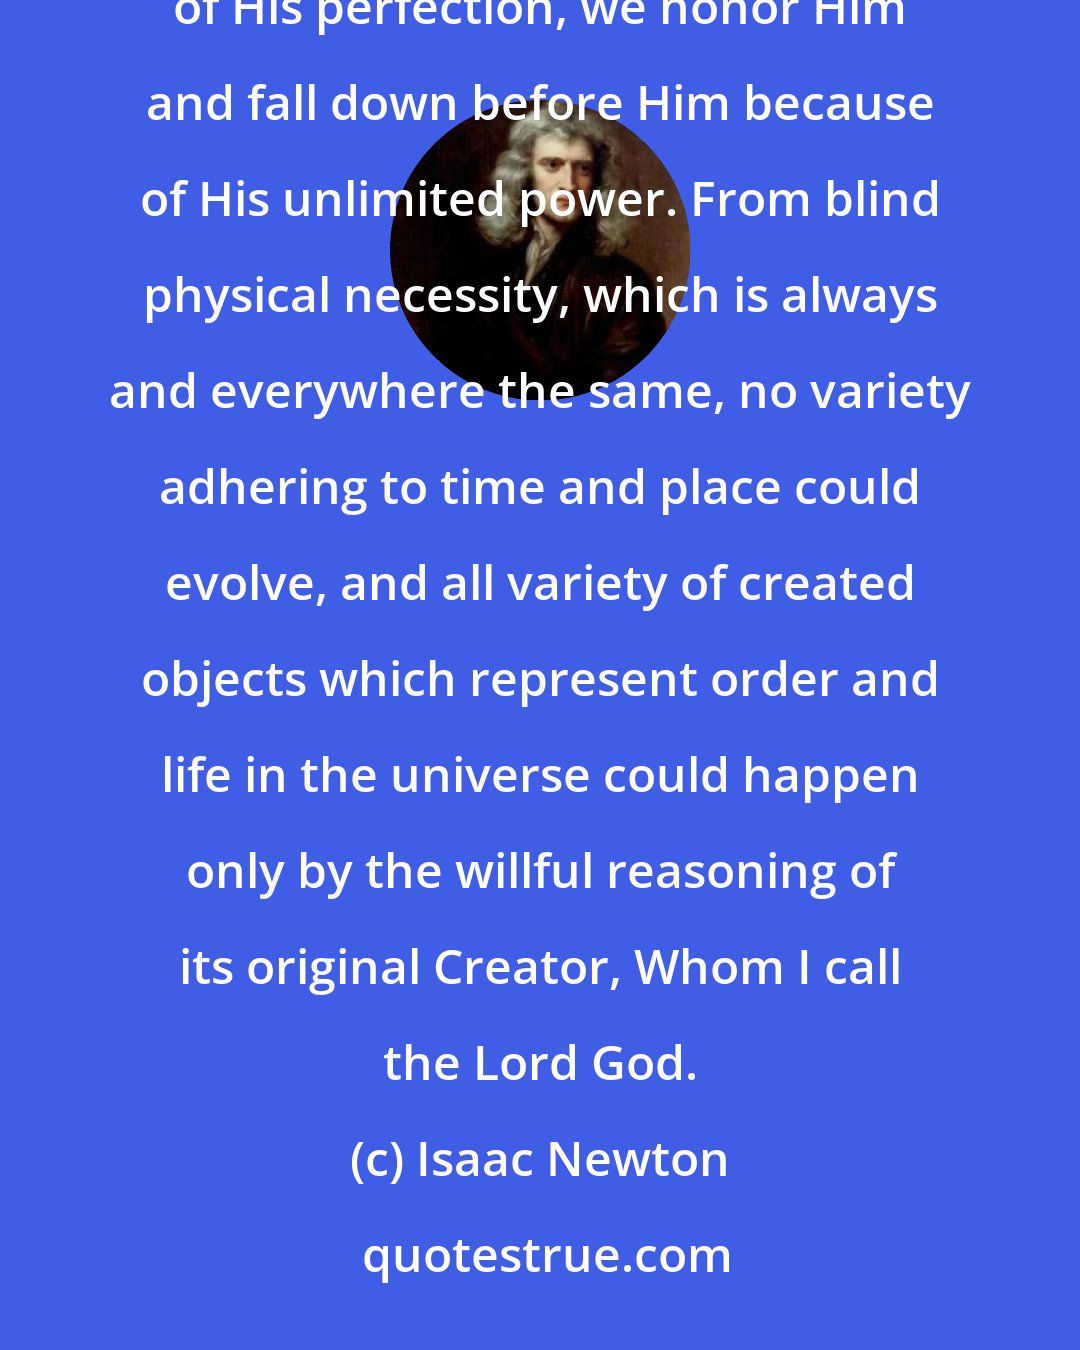 Isaac Newton: A Heavenly Master governs all the world as Sovereign of the universe. We are astonished at Him by reason of His perfection, we honor Him and fall down before Him because of His unlimited power. From blind physical necessity, which is always and everywhere the same, no variety adhering to time and place could evolve, and all variety of created objects which represent order and life in the universe could happen only by the willful reasoning of its original Creator, Whom I call the Lord God.